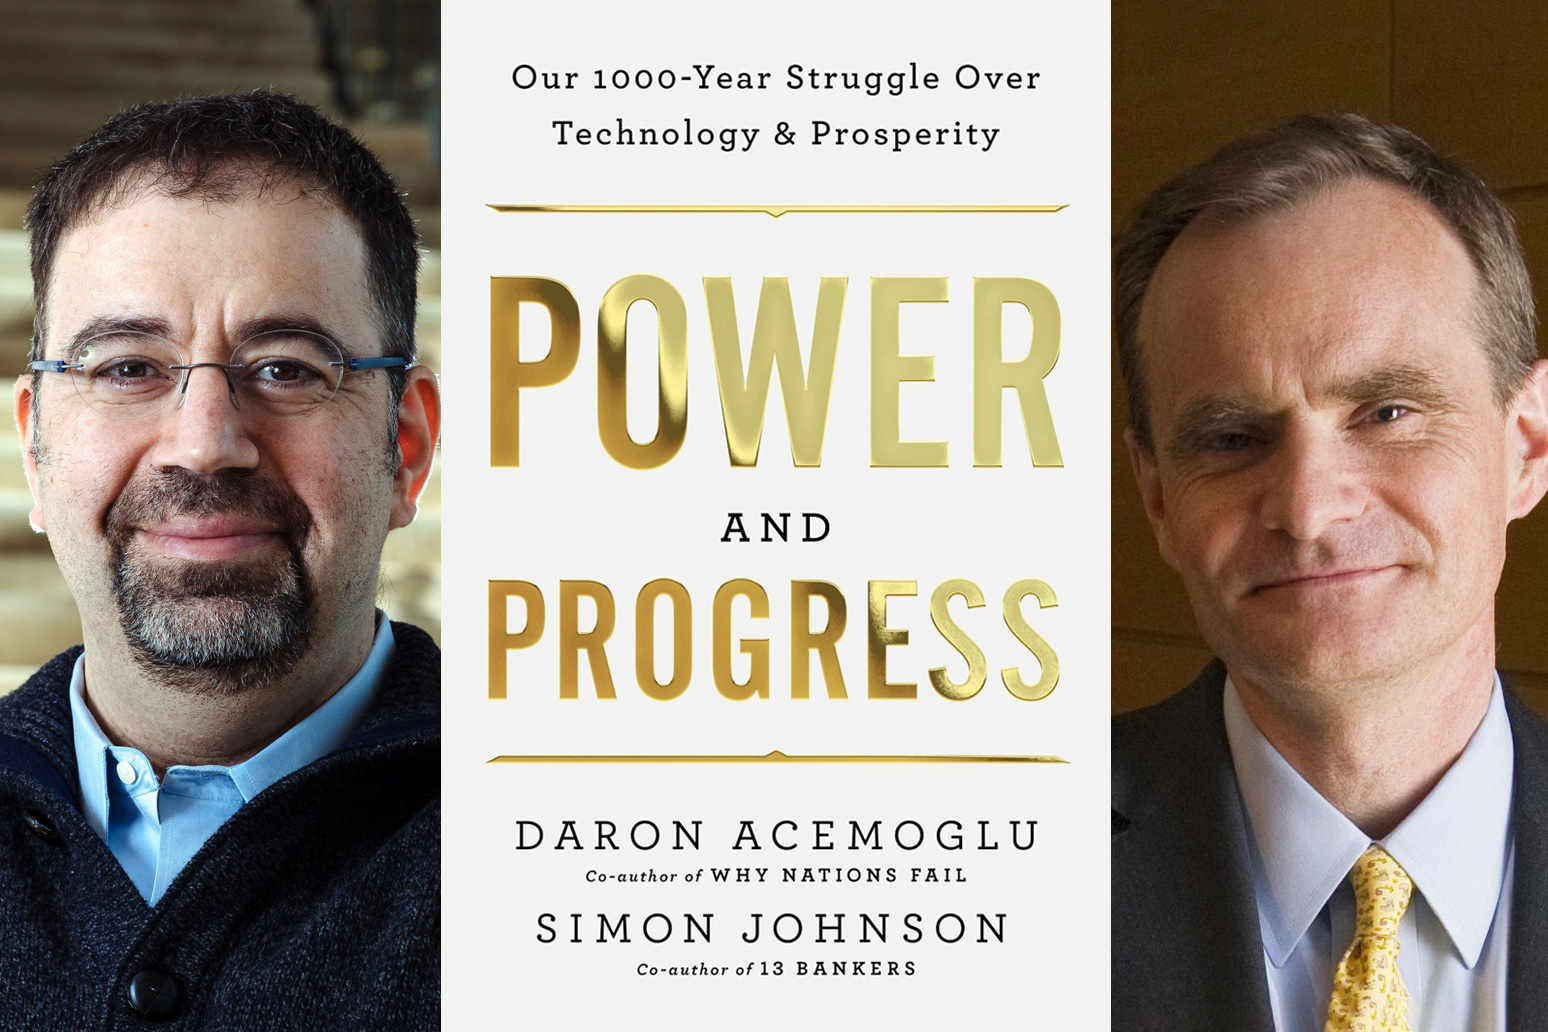 Daron Acemoglu, left, and Simon Johnson are the authors of the new book, “Power and Progress: Our 1000-year Struggle over Technology & Prosperity.” 